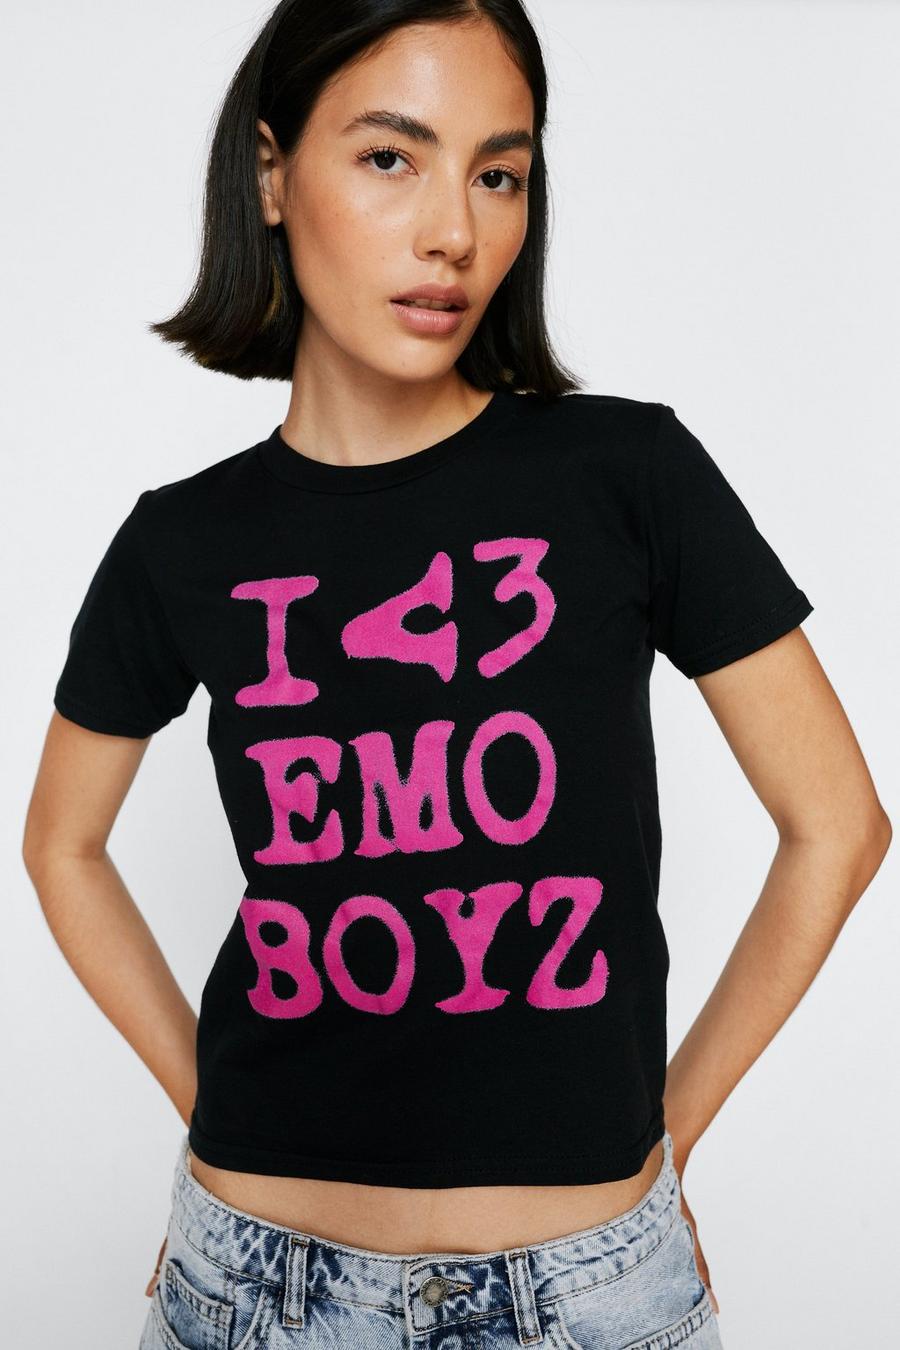 I Love Emo Boyz Fitted Graphic T-shirt